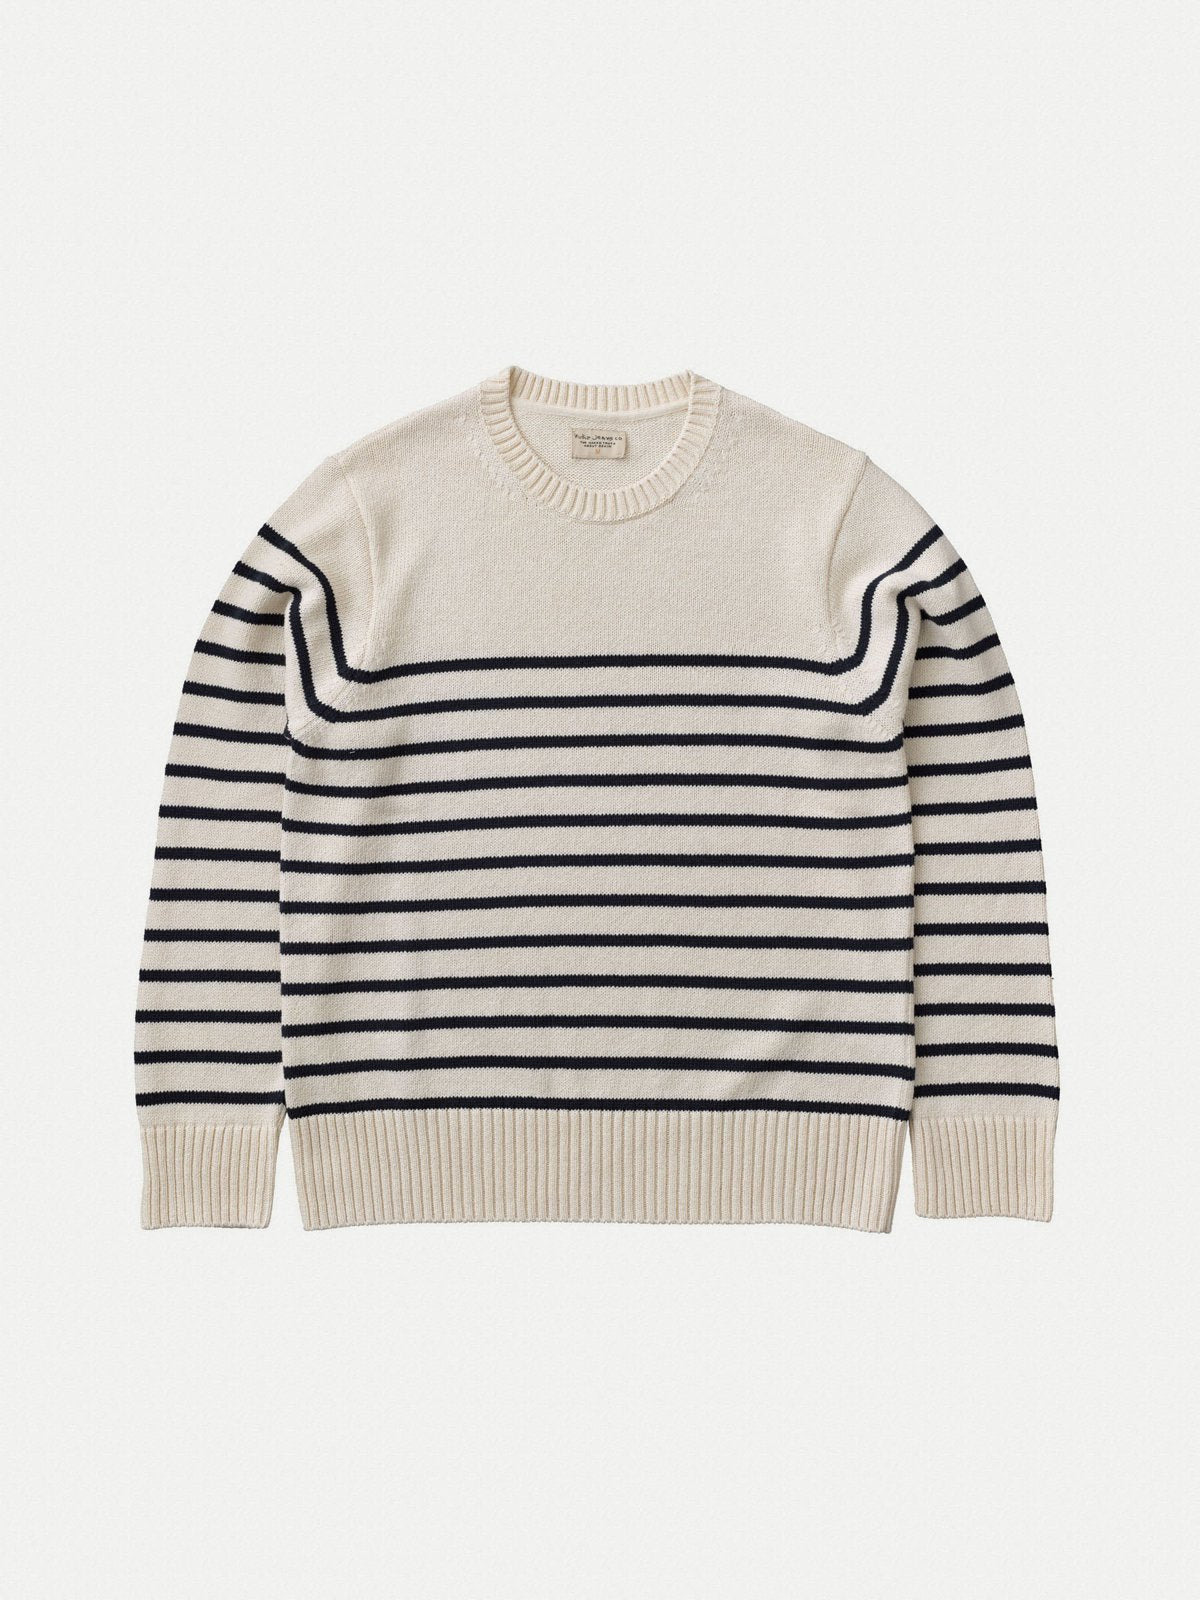 Nudie - Hampus Recycled Sweater - Offwhite/Navy Stripe